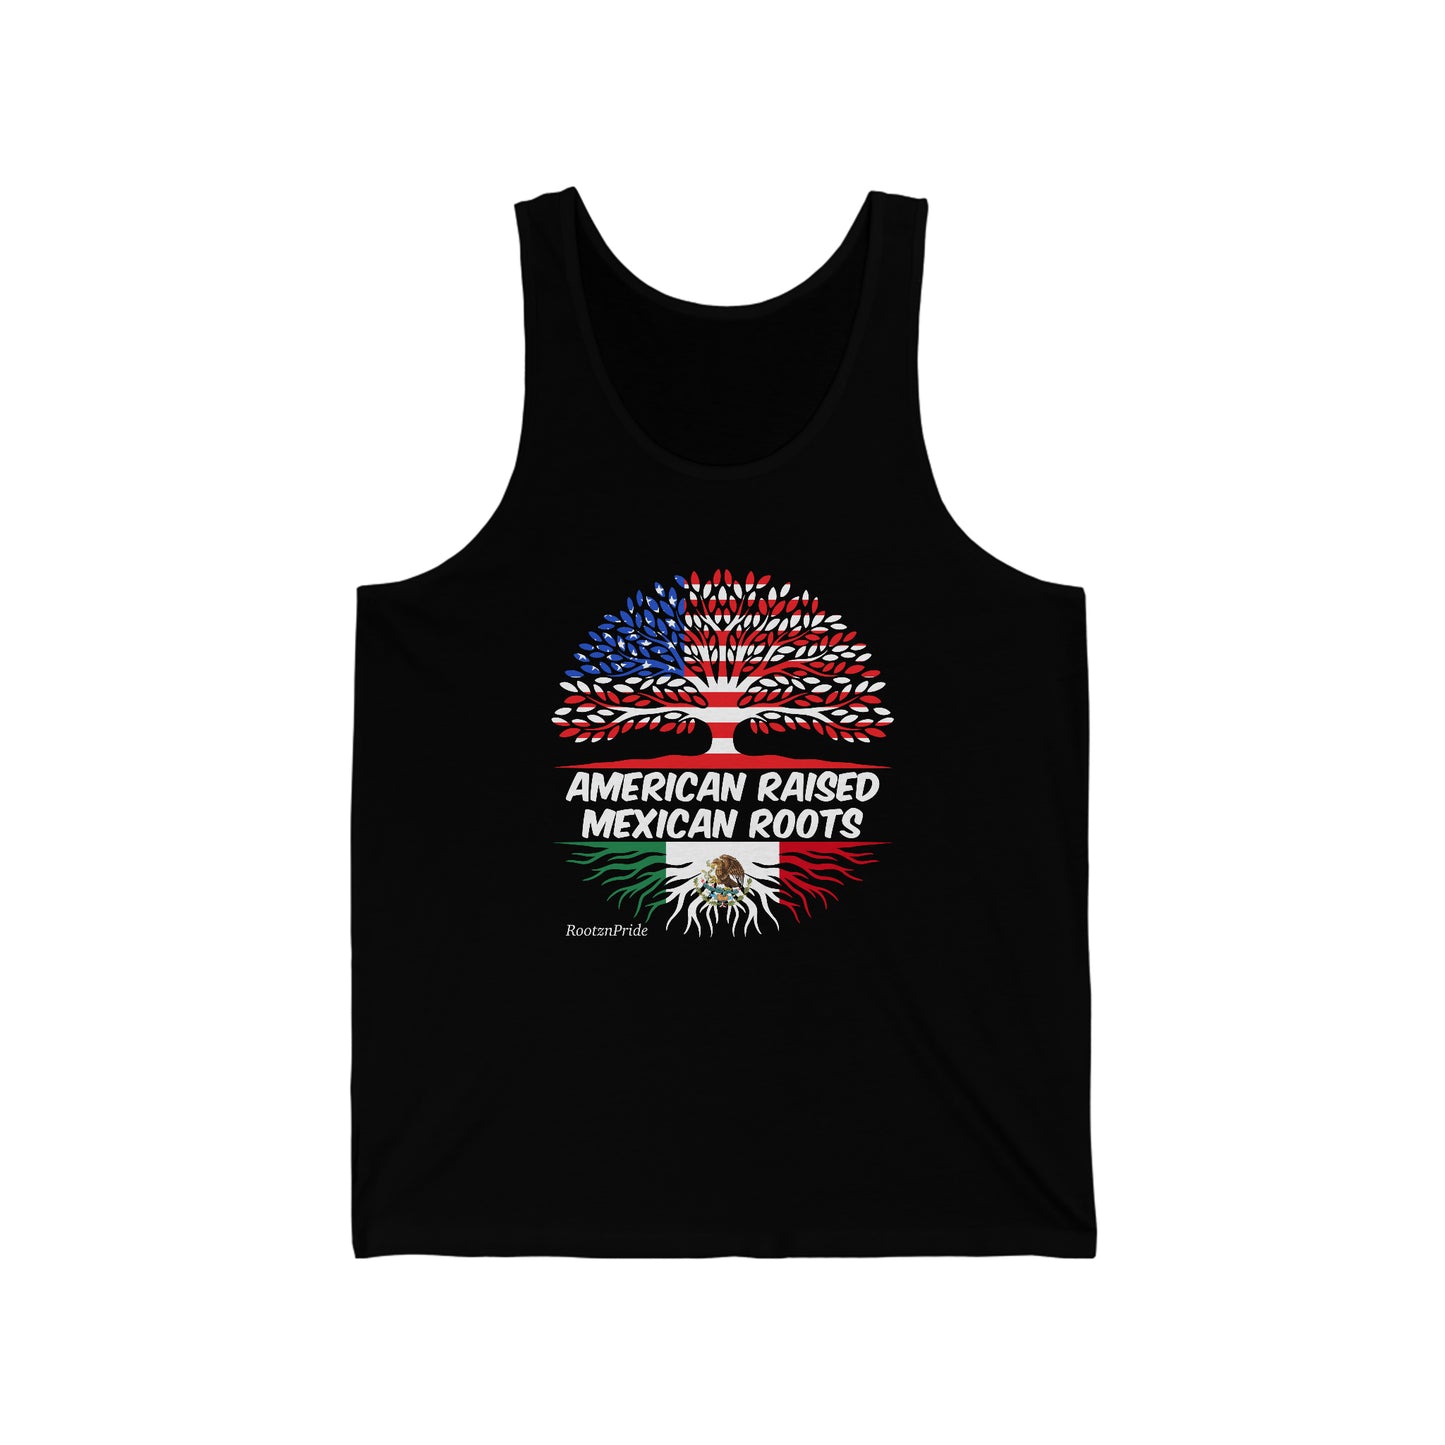 Mexican Roots Design 1: Tank Top